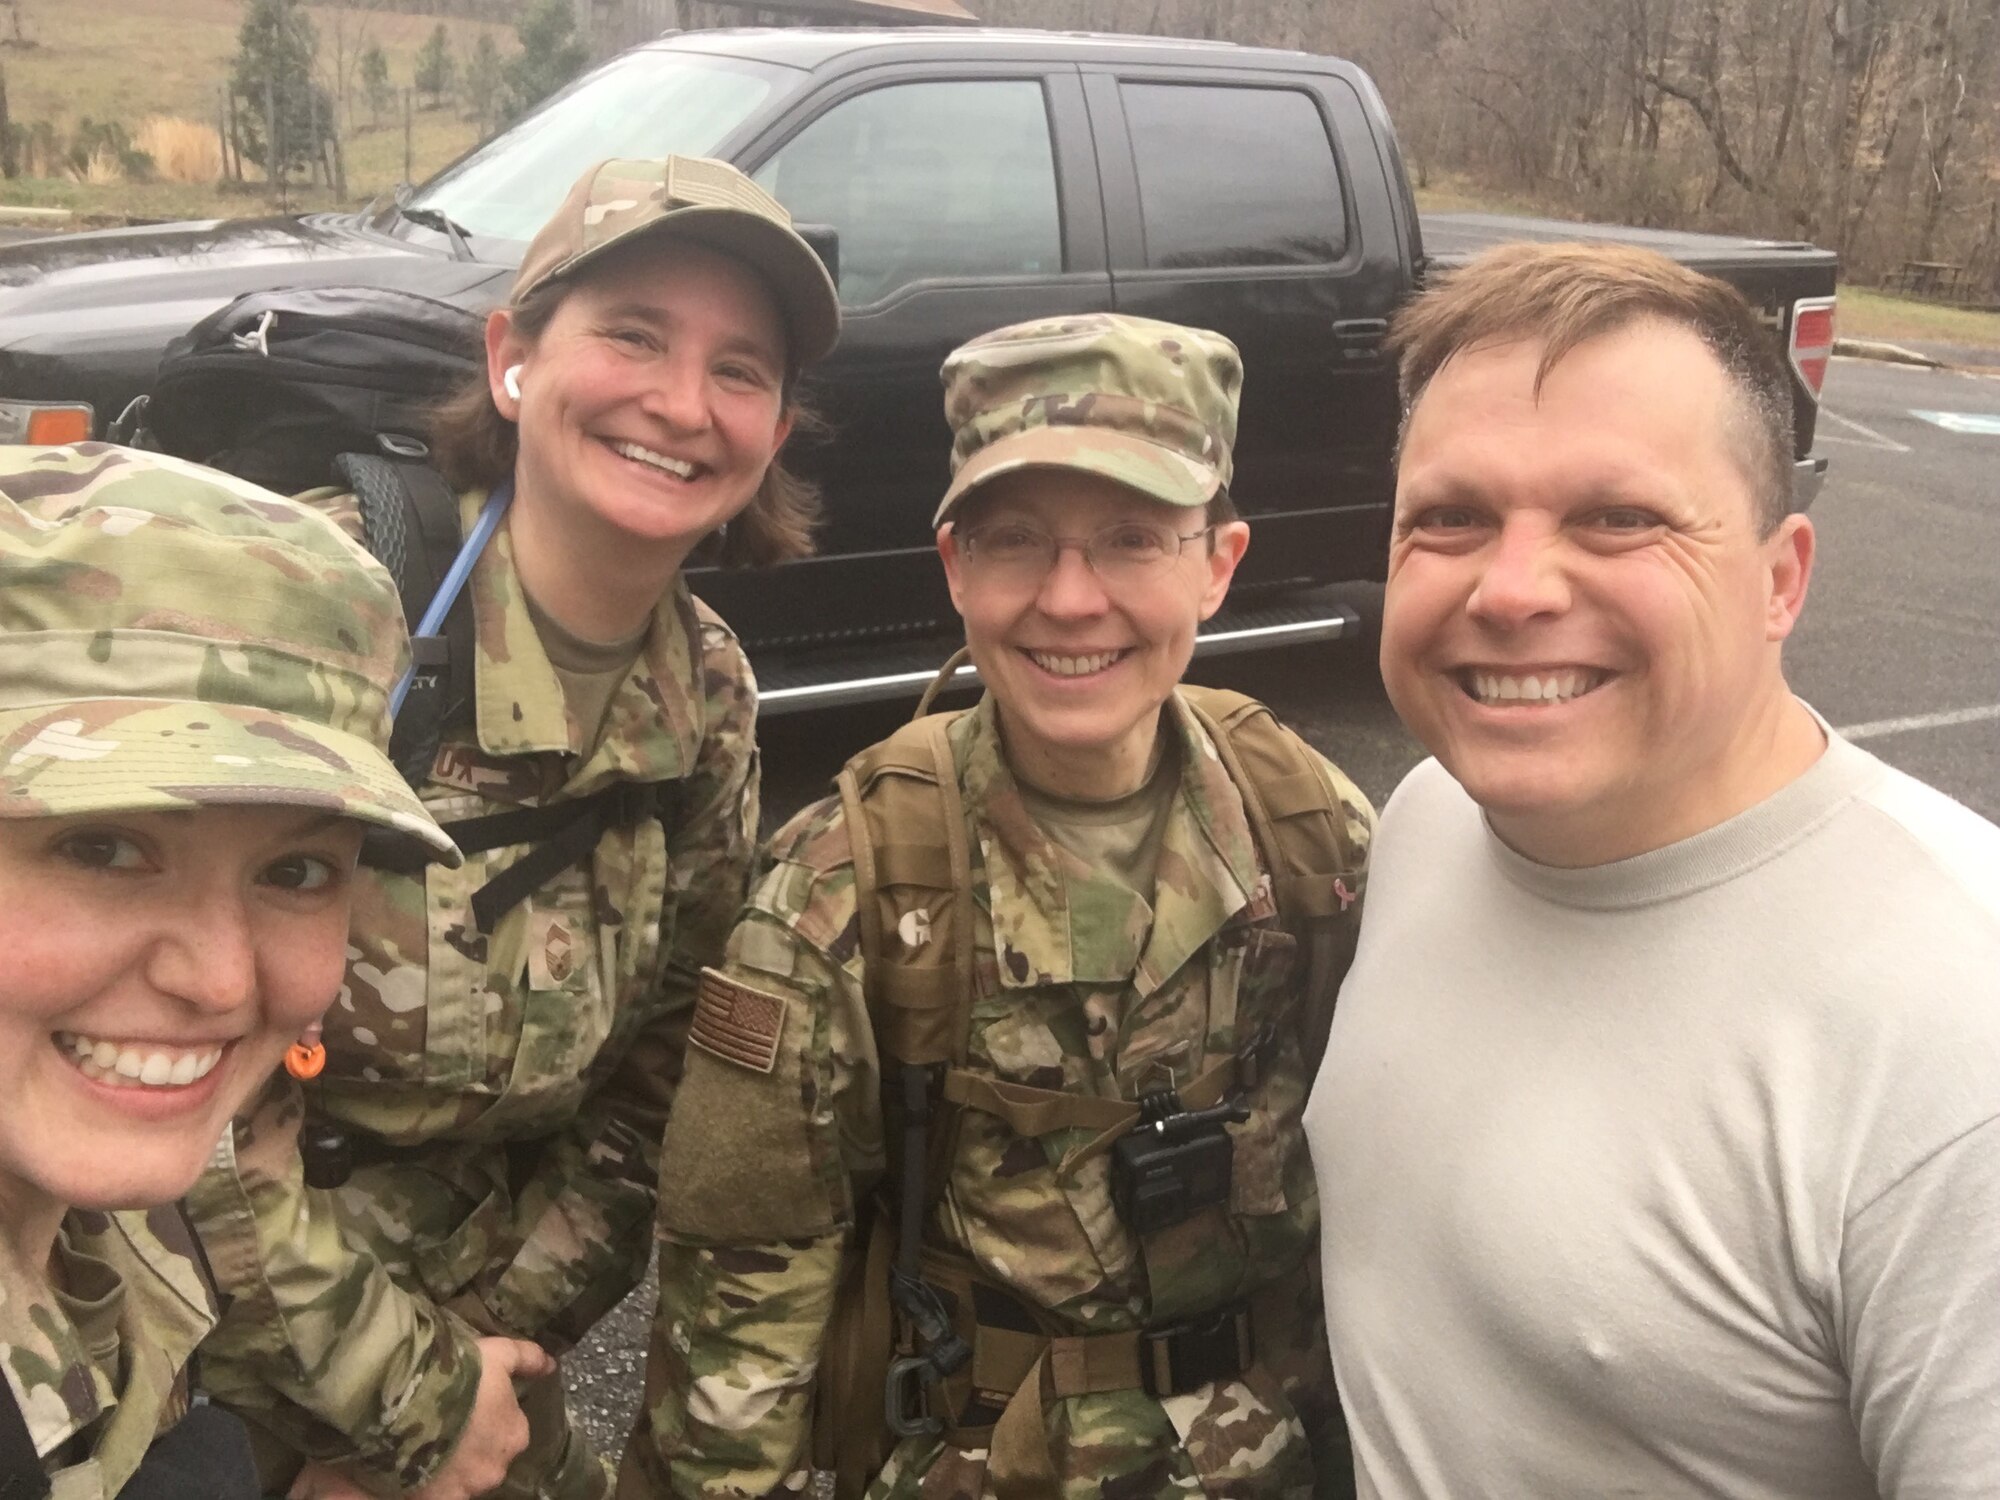 Left to right: TSgt Jilian McGreen, CMSgt Jennifer Cox, CMSgt Deborah Volker, MSgt Ruan Britts
Members of the first Bataan Memorial Death March team from the USAF Band on 15 March 2020. Upon the event’s cancelation, the group completed a 26.2 mile march locally.